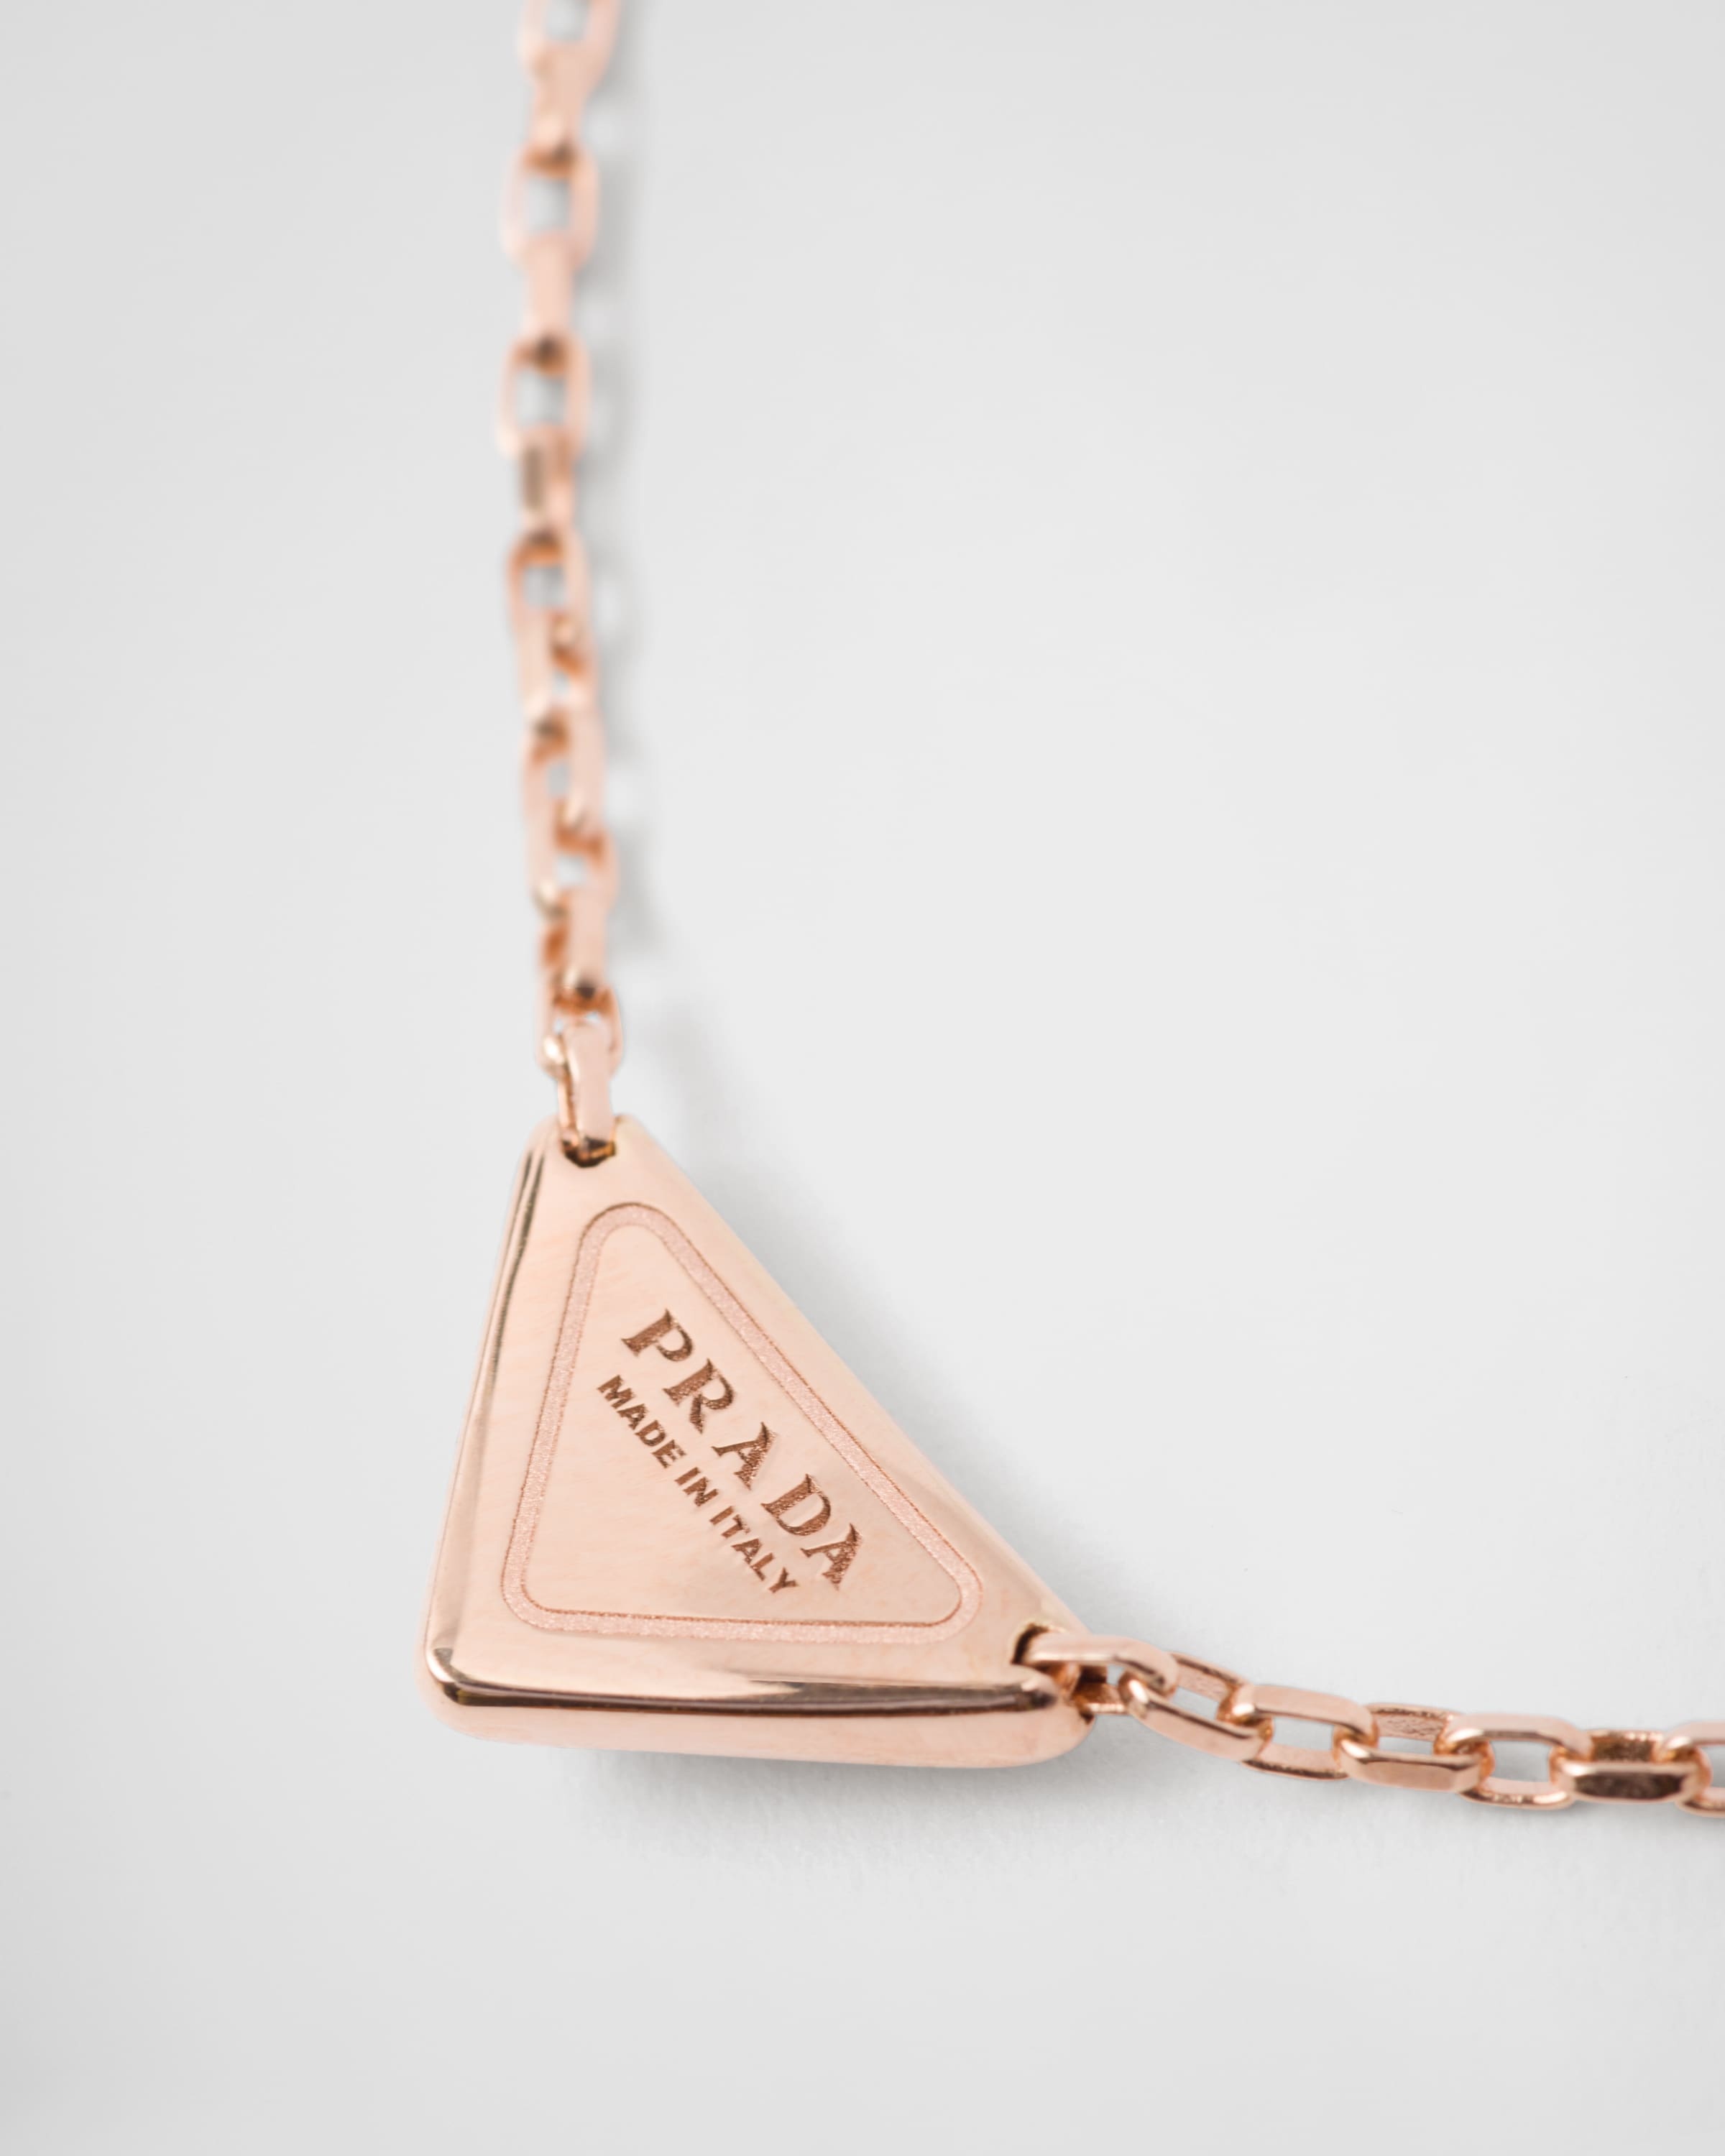 Eternal Gold necklace in pink gold with nano triangle pendant - 2